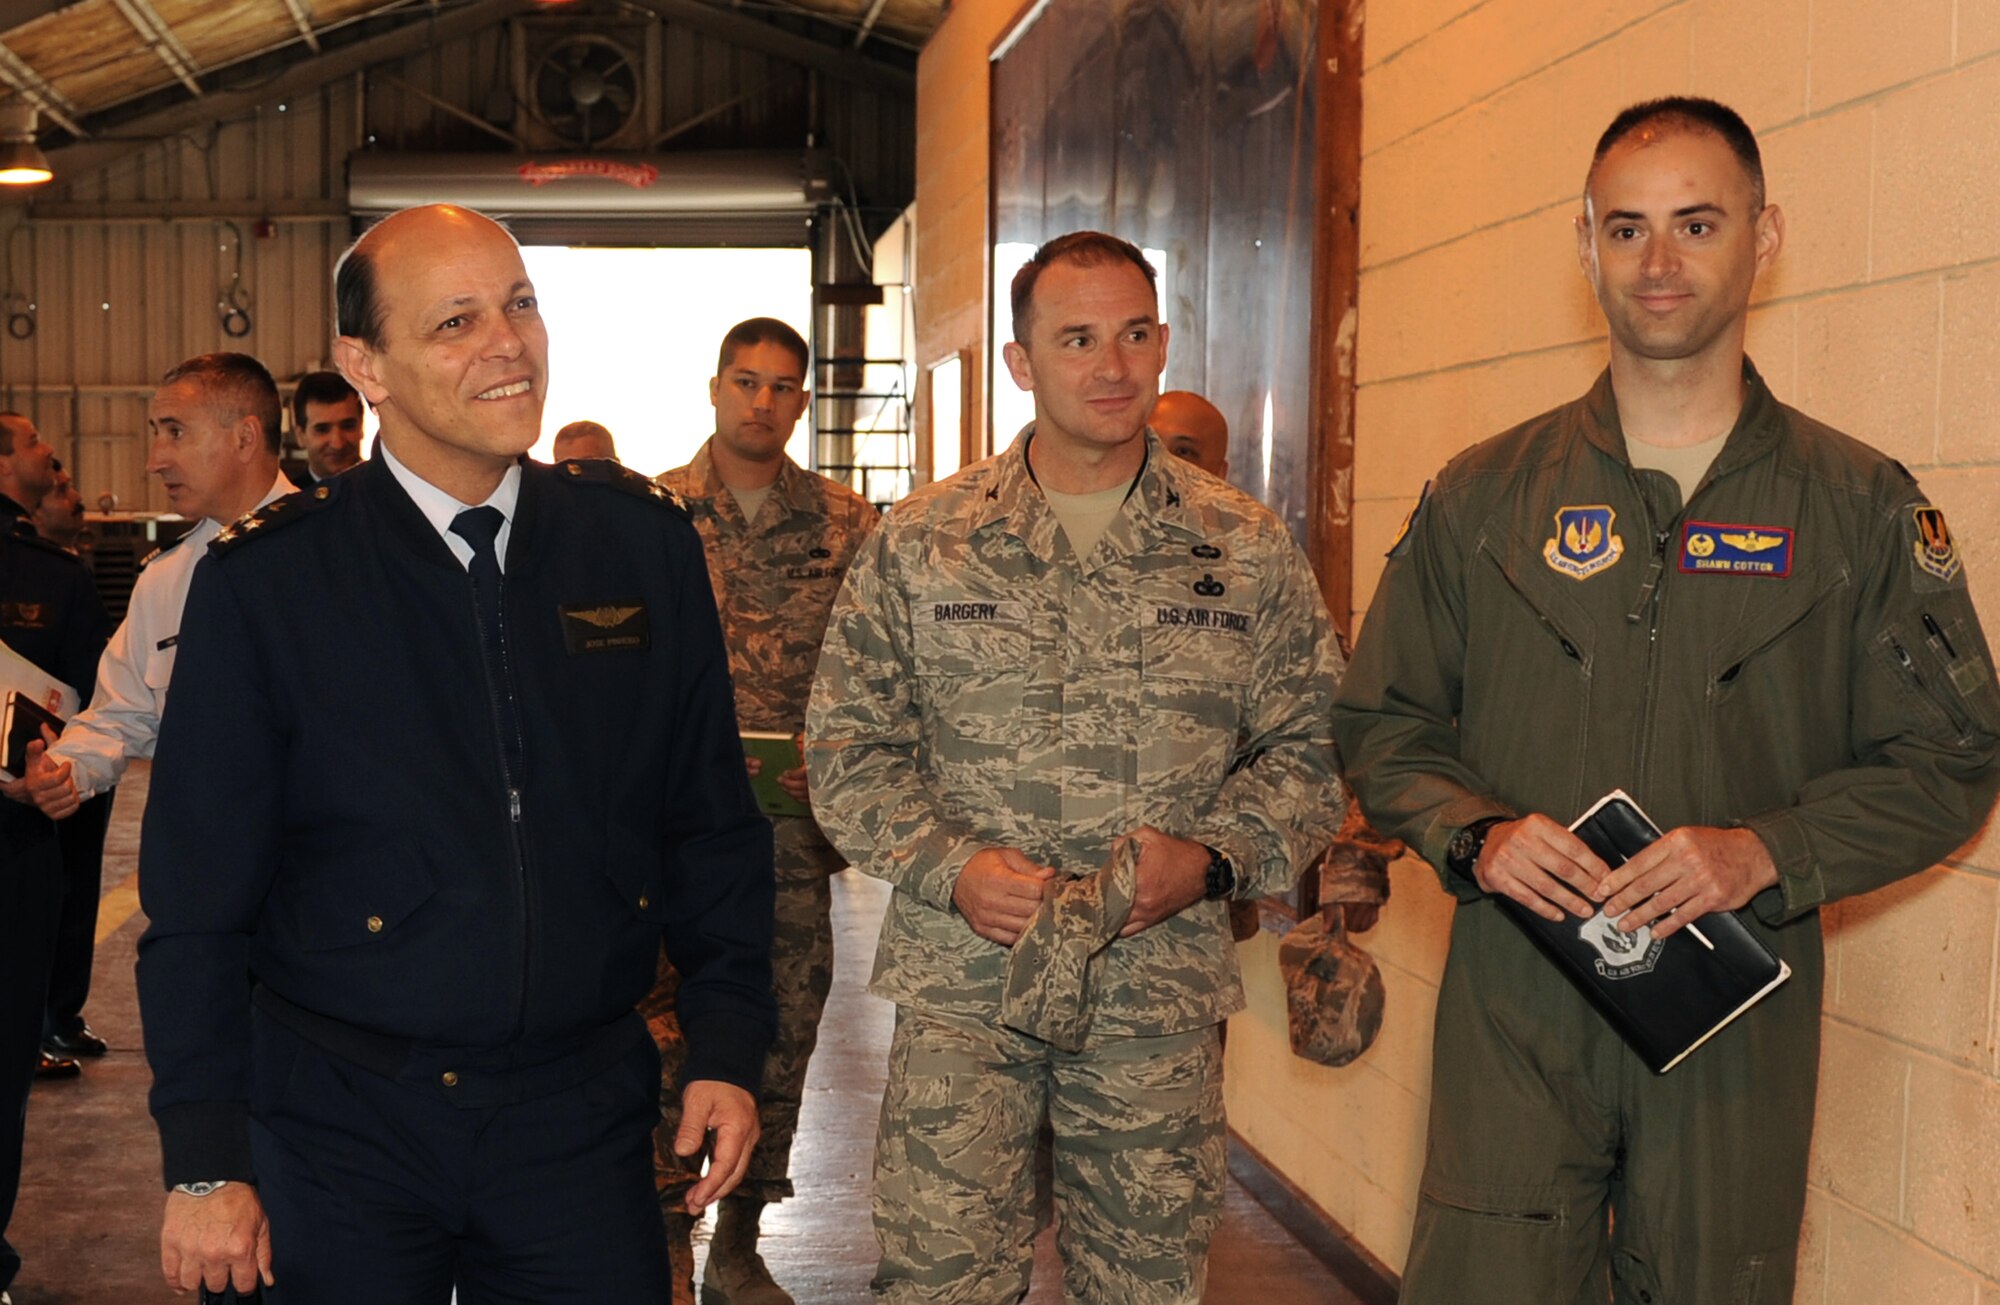 Gen. Jose Antonio Magalhaes Araujo Pinheiro, Portuguese Air Force Chief of Staff, takes a tour through a 65th Operations Support Squadron facility with Col. Chris Bargery, 65th ABW commander and Lt. Col. Shawn Cotton, 65th OSS commander, during his visit to the 65th ABW, June 4, 2013.   Gen. Araujo Pinheiro stopped at Lajes Field for the 72nd Anniversary of Portuguese Air Base 4.  (Photo by Guido Melo/released)